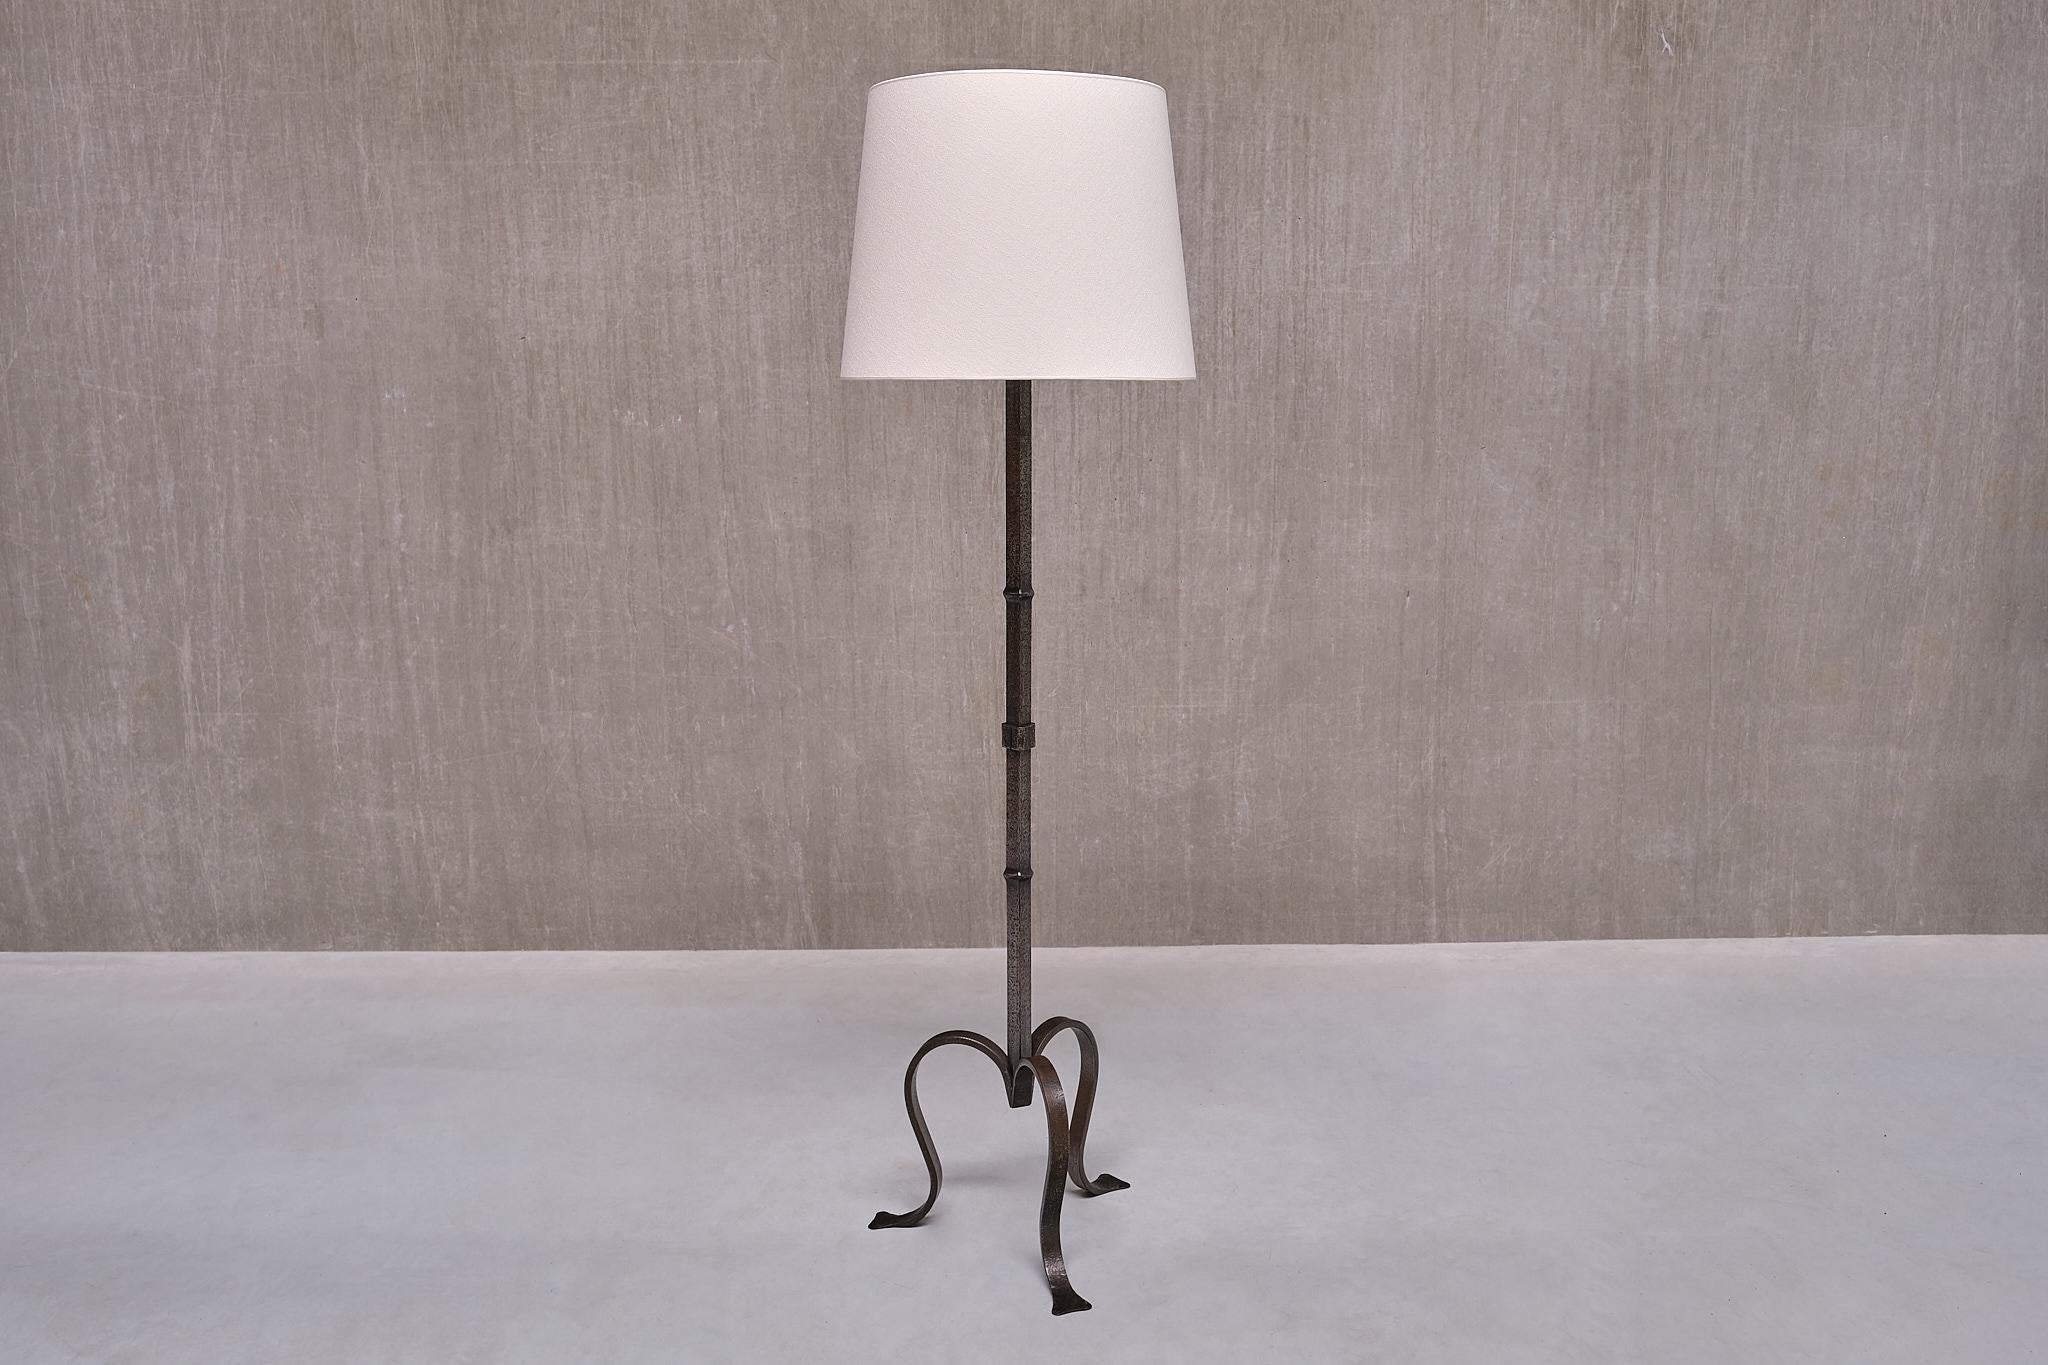 Sculptural French Modern Three Legged Floor Lamp in Wrought Iron, 1950s For Sale 7